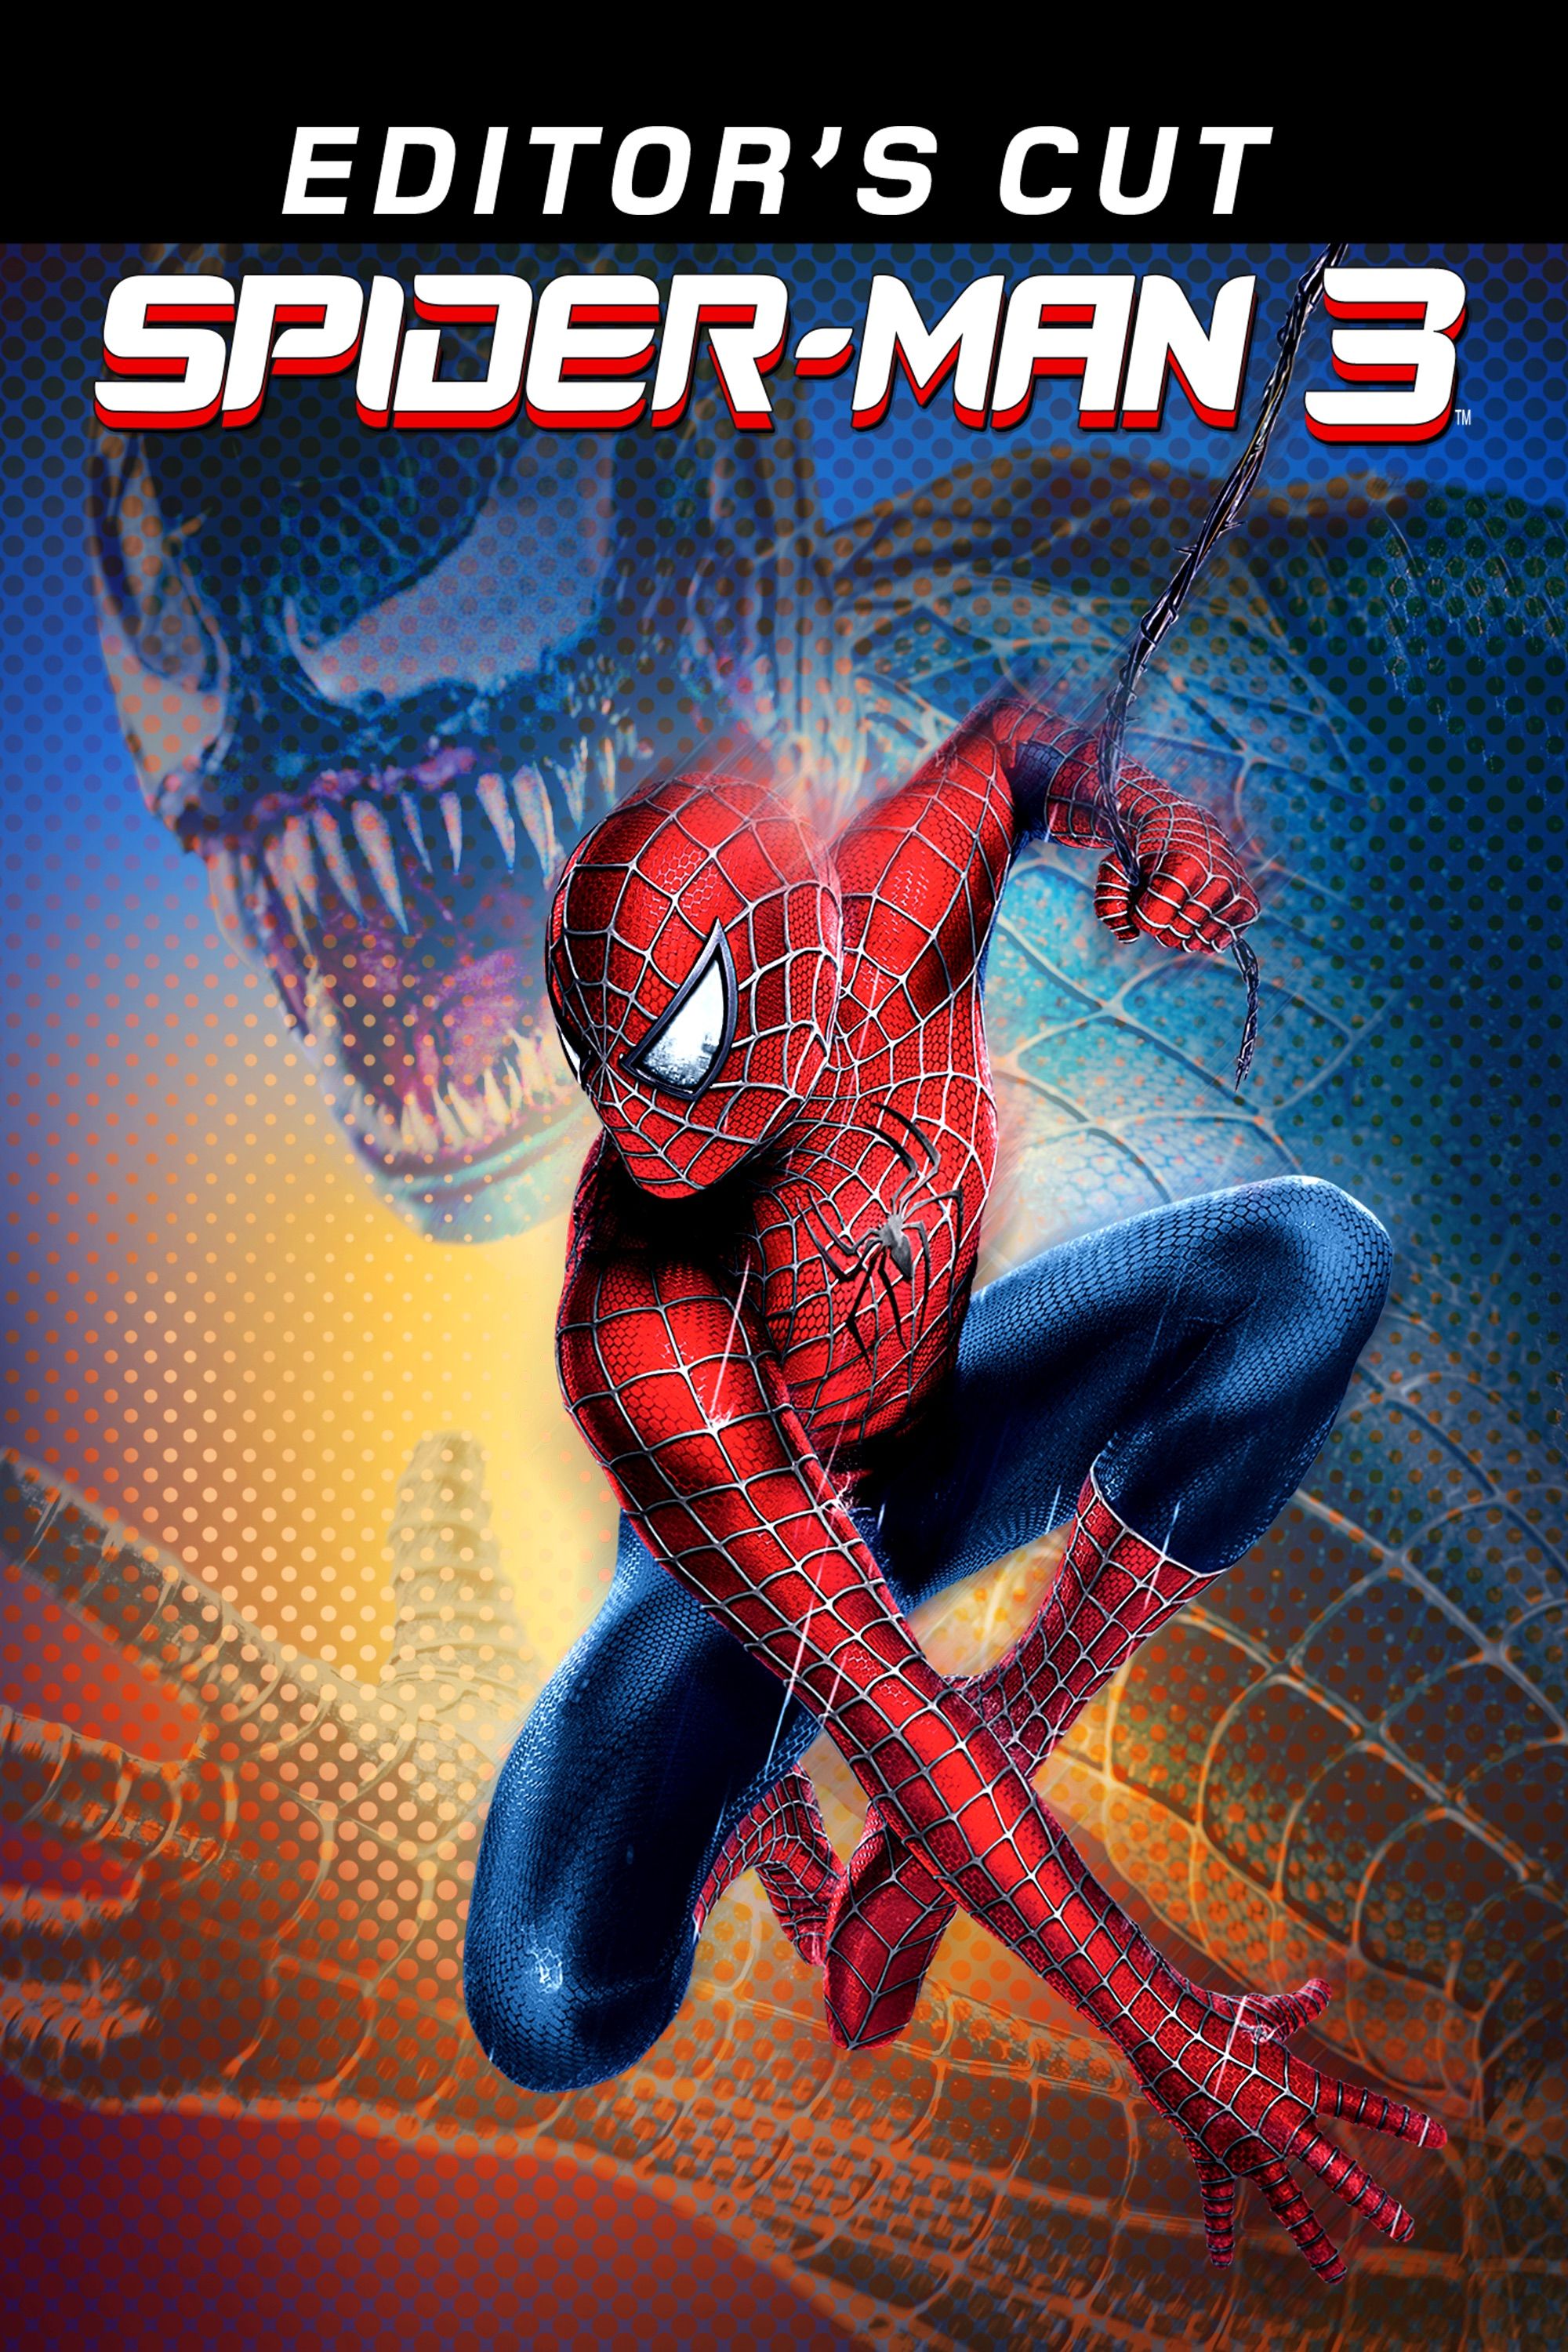 Spider-Man 3 (Editor's Cut) | Movies Anywhere